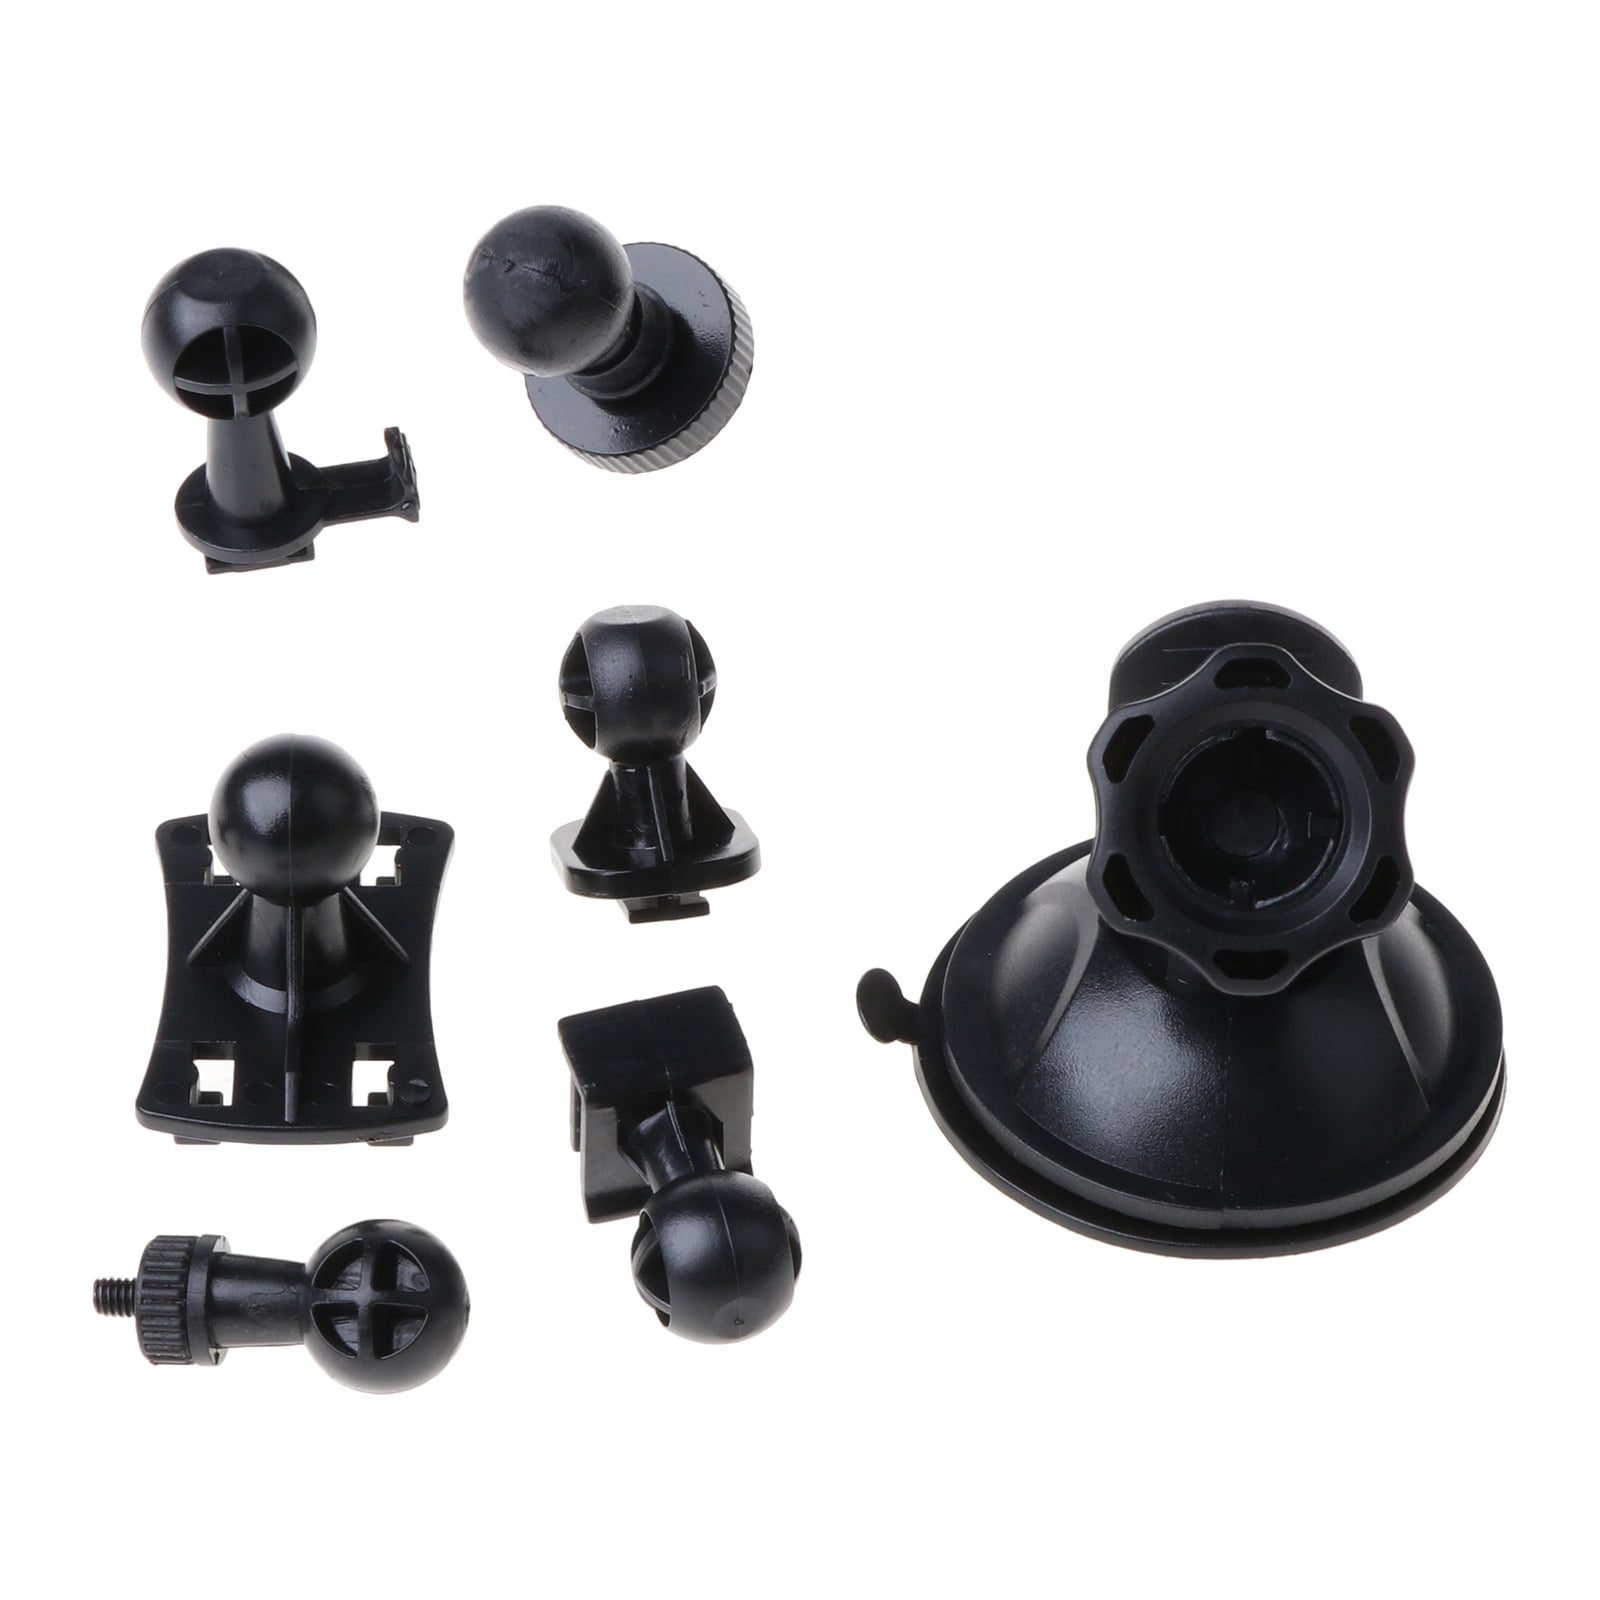 Adjustable Suction Cup Puller Mount Bracket for Auto Body Car Dash Cam G1W G1W-B 